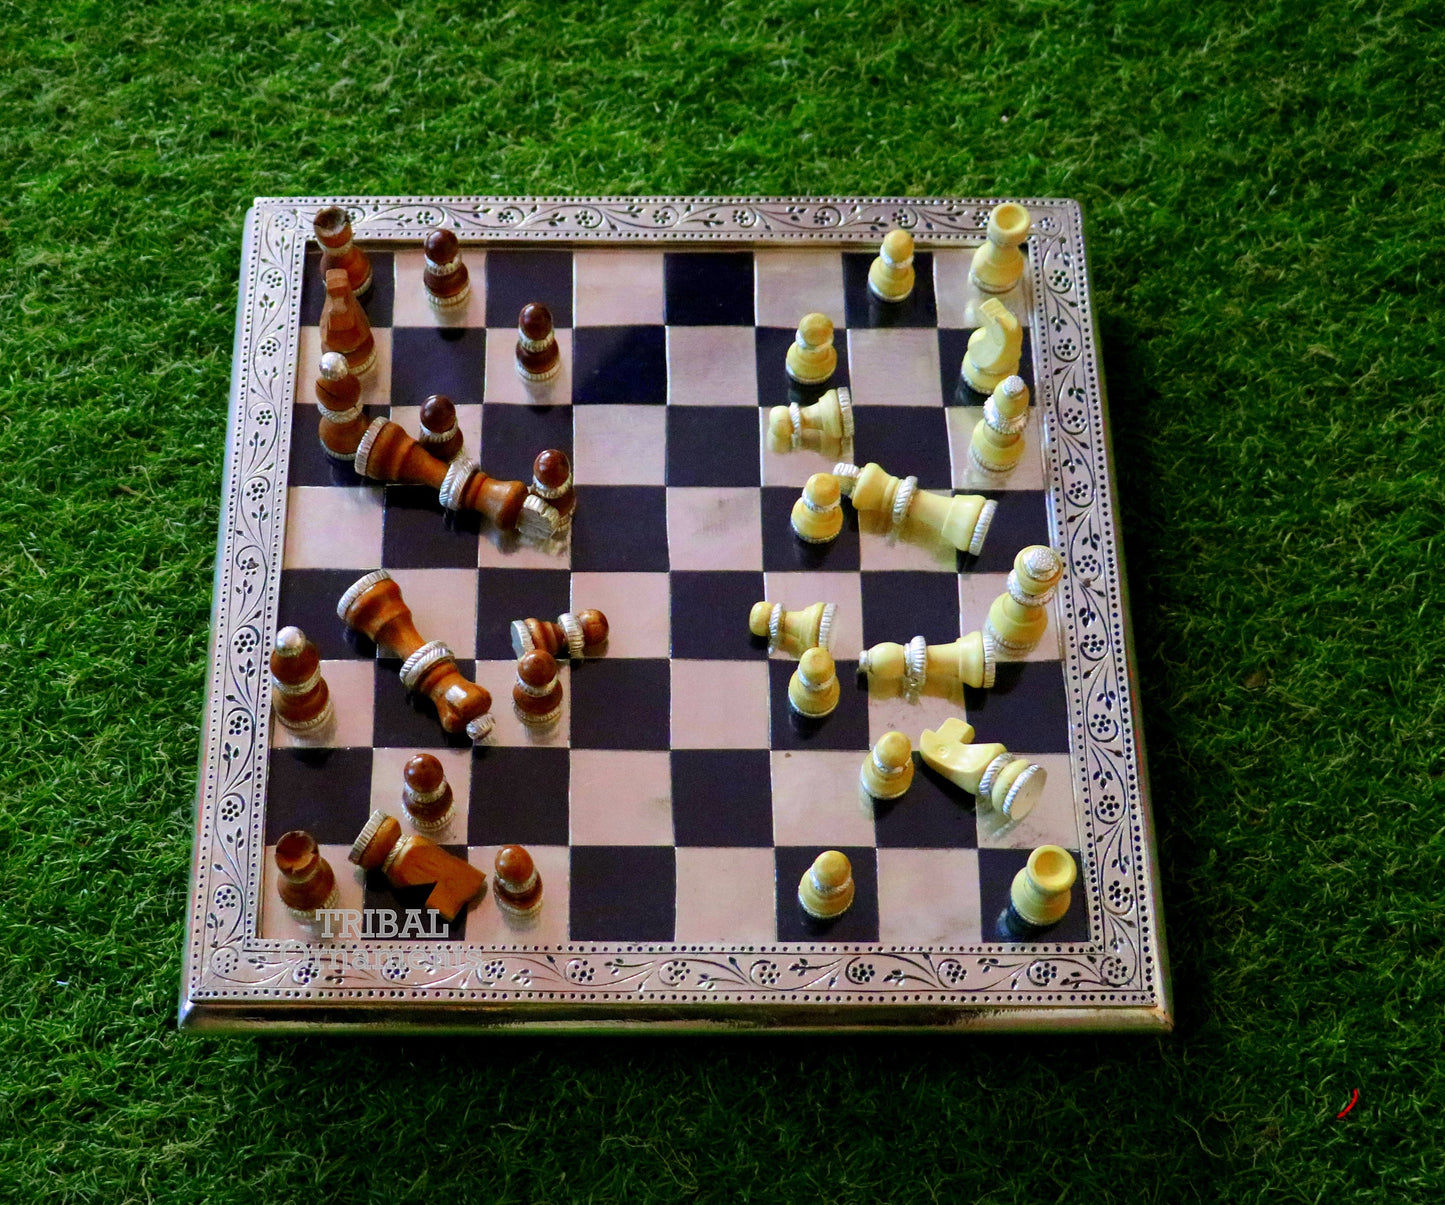 925 sterling silver work chessboard, Amazing customized handcrafted design on wooden base, fabulous Royal silver article from india fr11 - TRIBAL ORNAMENTS